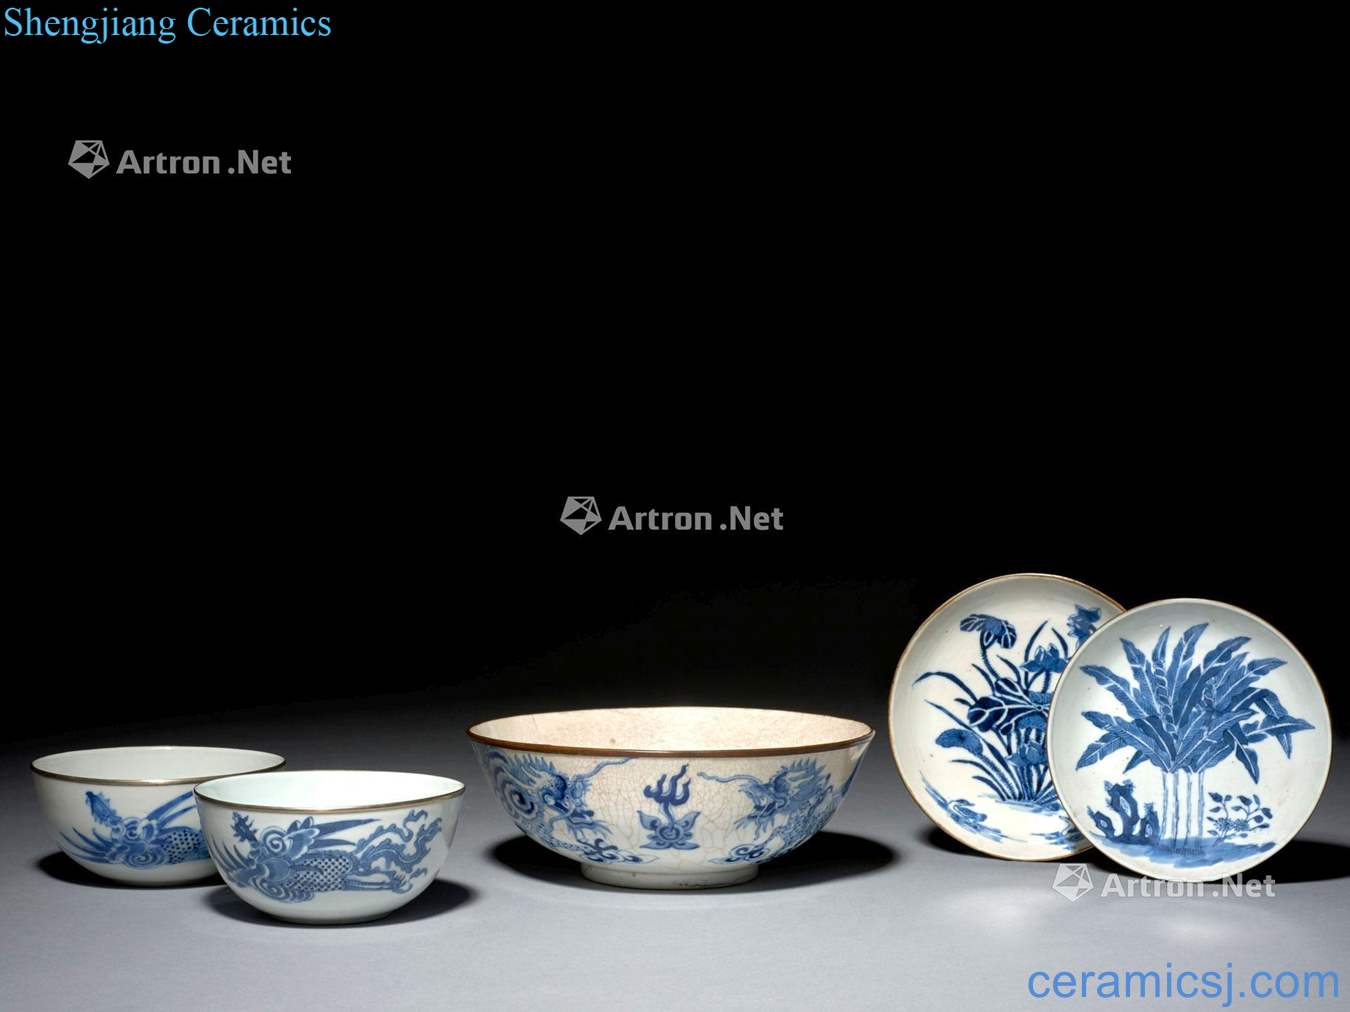 One OF the 19 th CENTURY A PAIR OF BLUE AND WHITE PORCELAIN BOWLS, A BOWL AND TWO SAUCERS